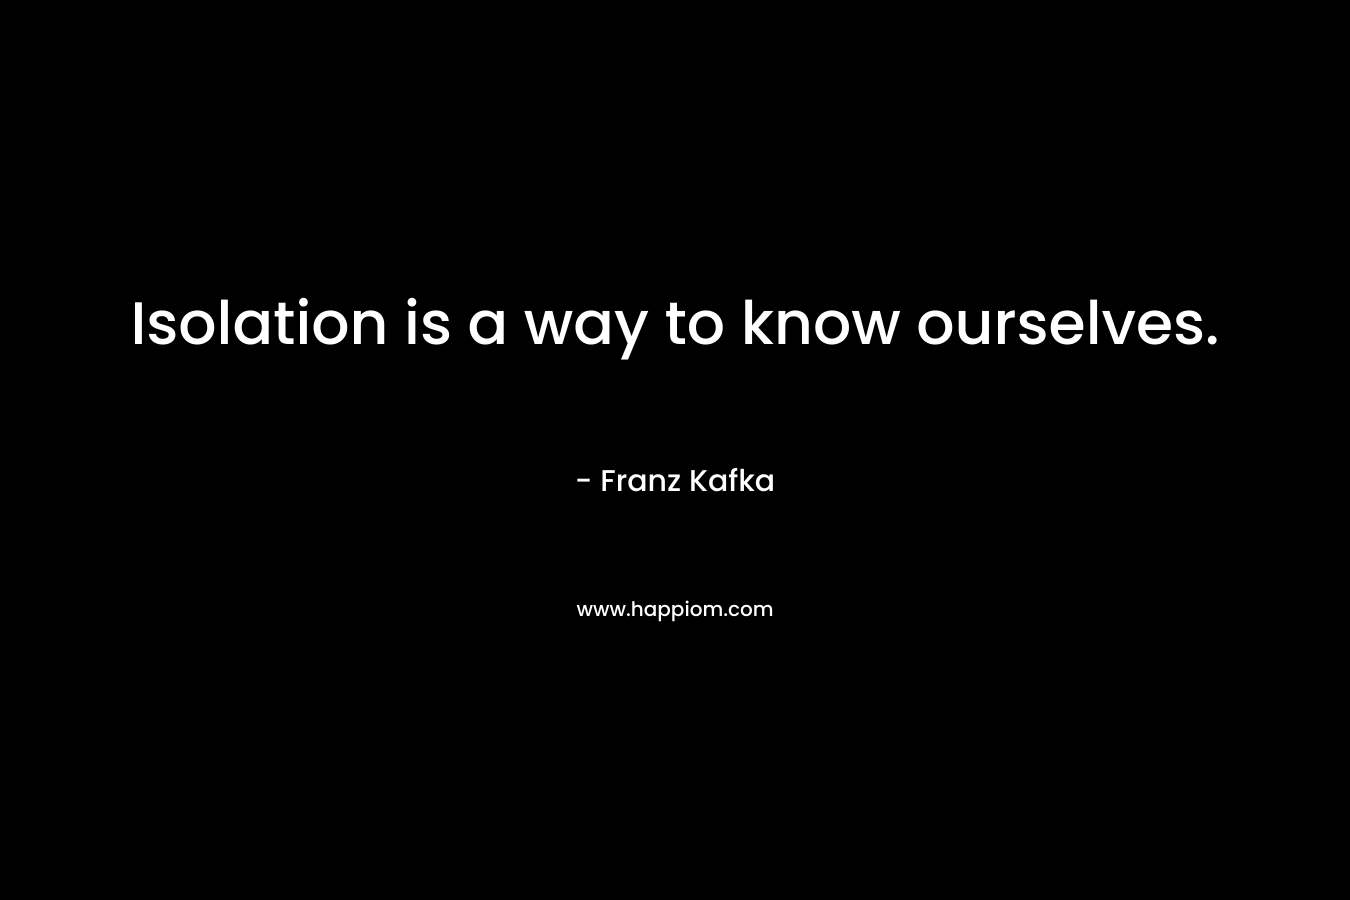 Isolation is a way to know ourselves.